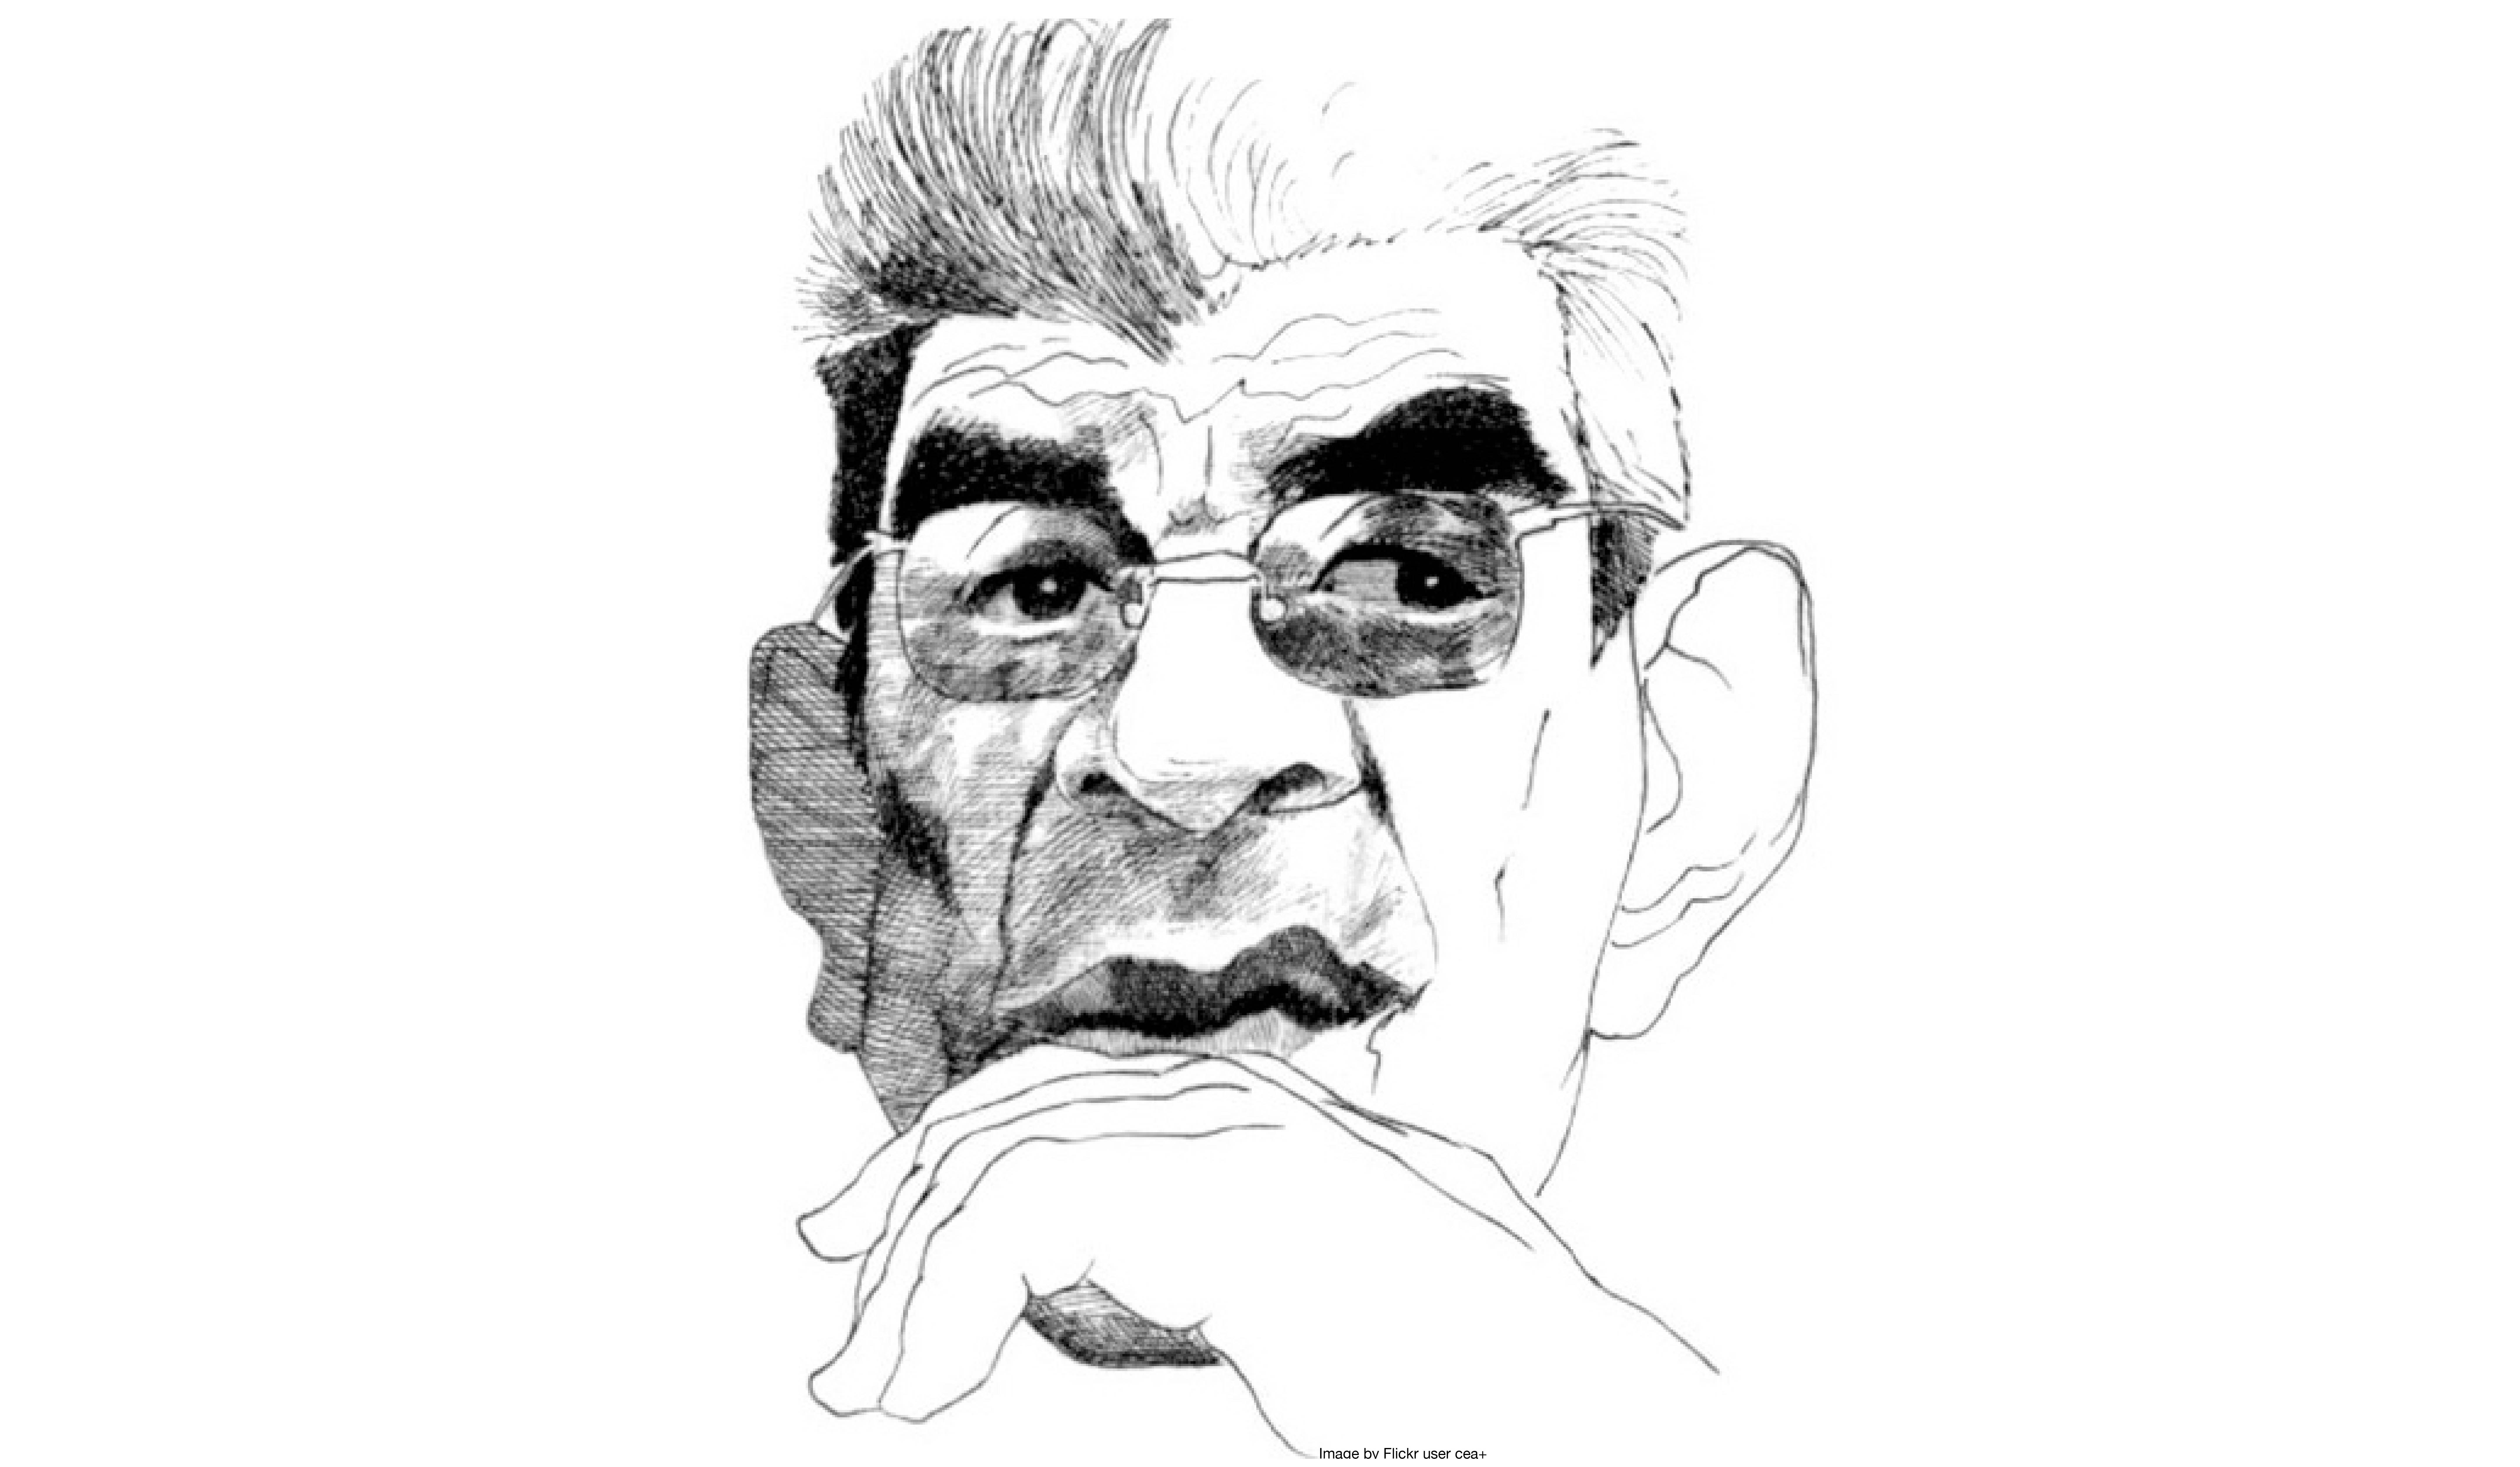 A drawing of French psychoanalyst Jacques Lacan